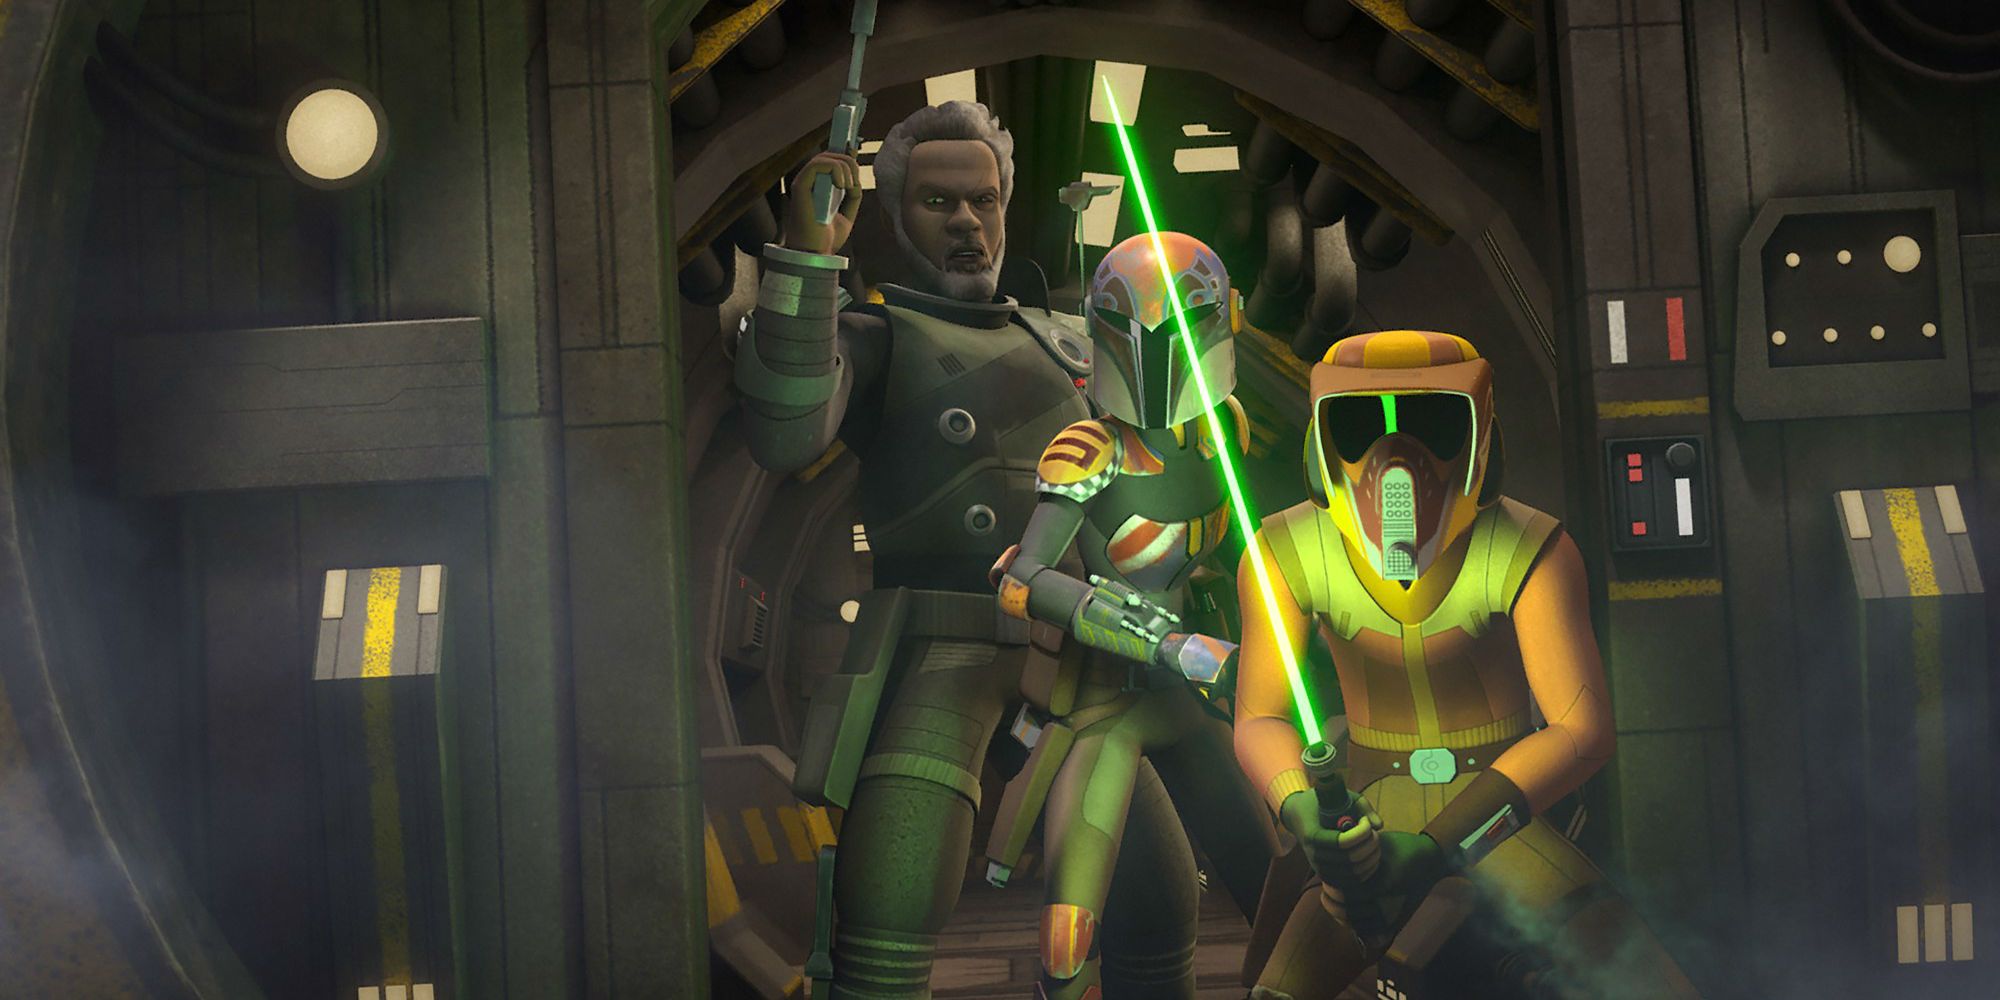 Star Wars Rebels Season 4 In the Name of the Rebellion Death Star Review